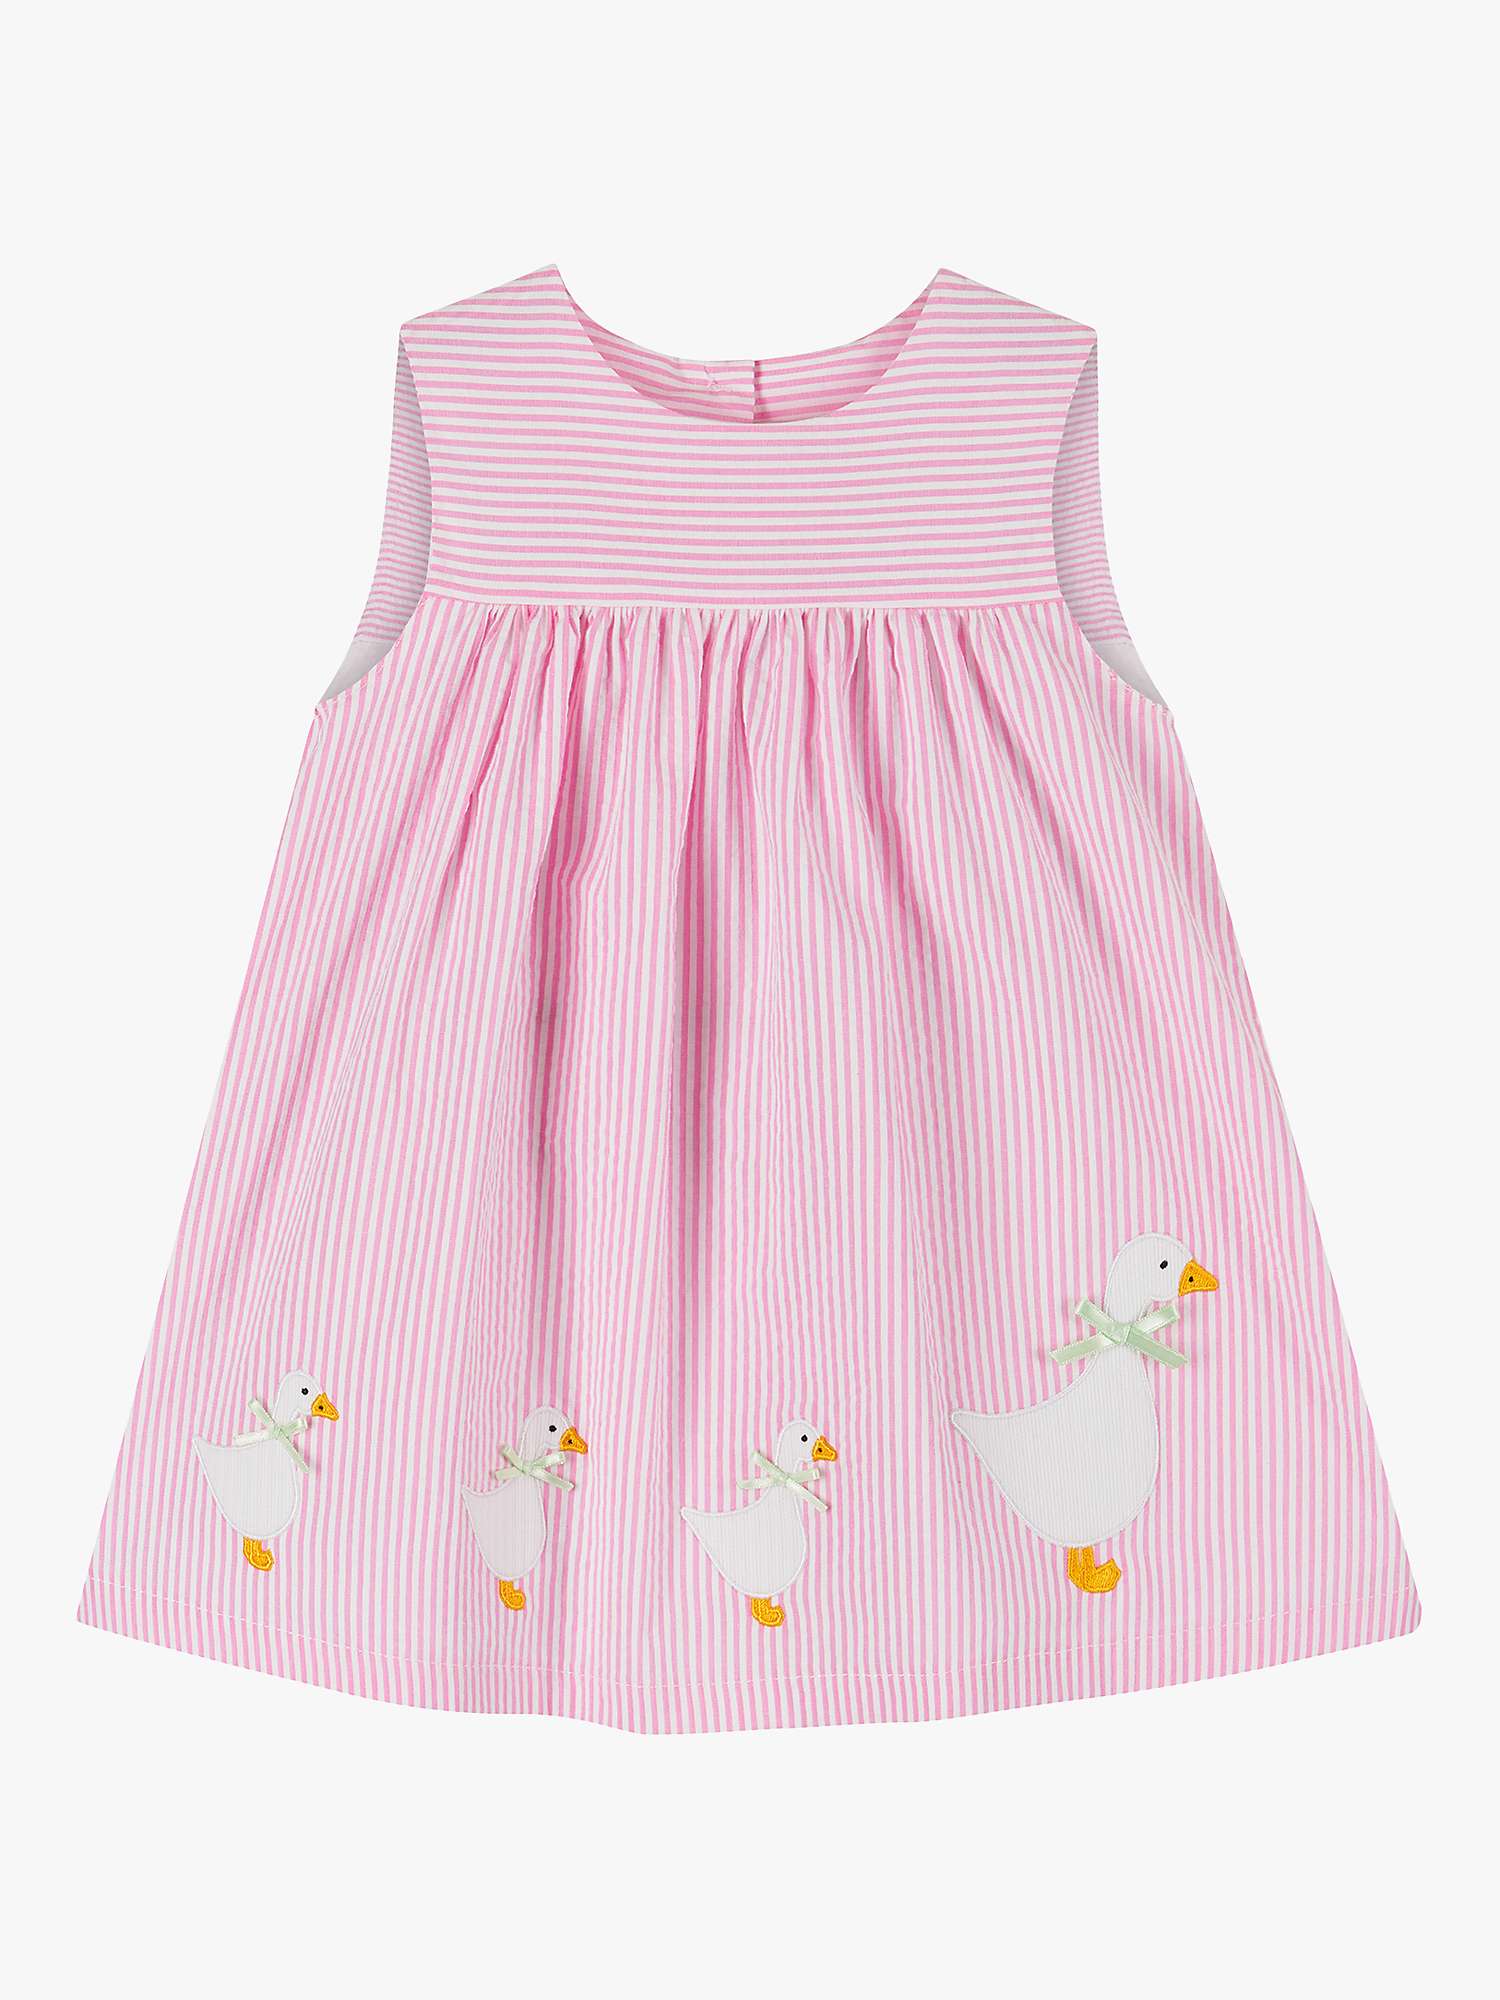 Buy Trotters Baby Jemima Striped Pinafore Dress Online at johnlewis.com